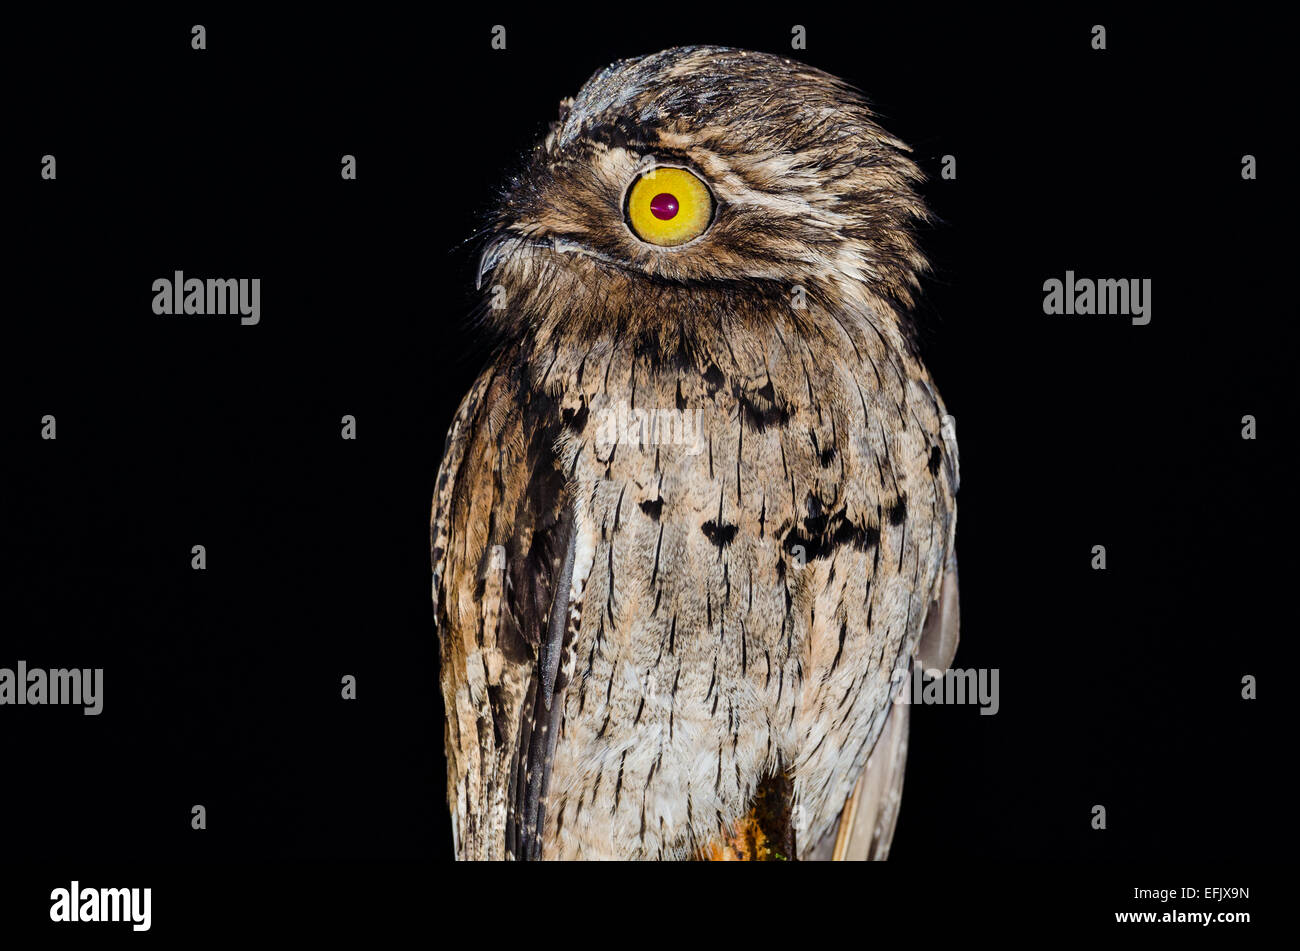 A Northern Potoo (Nyctibius jamaicensis) at night. Belize, Central America. Stock Photo